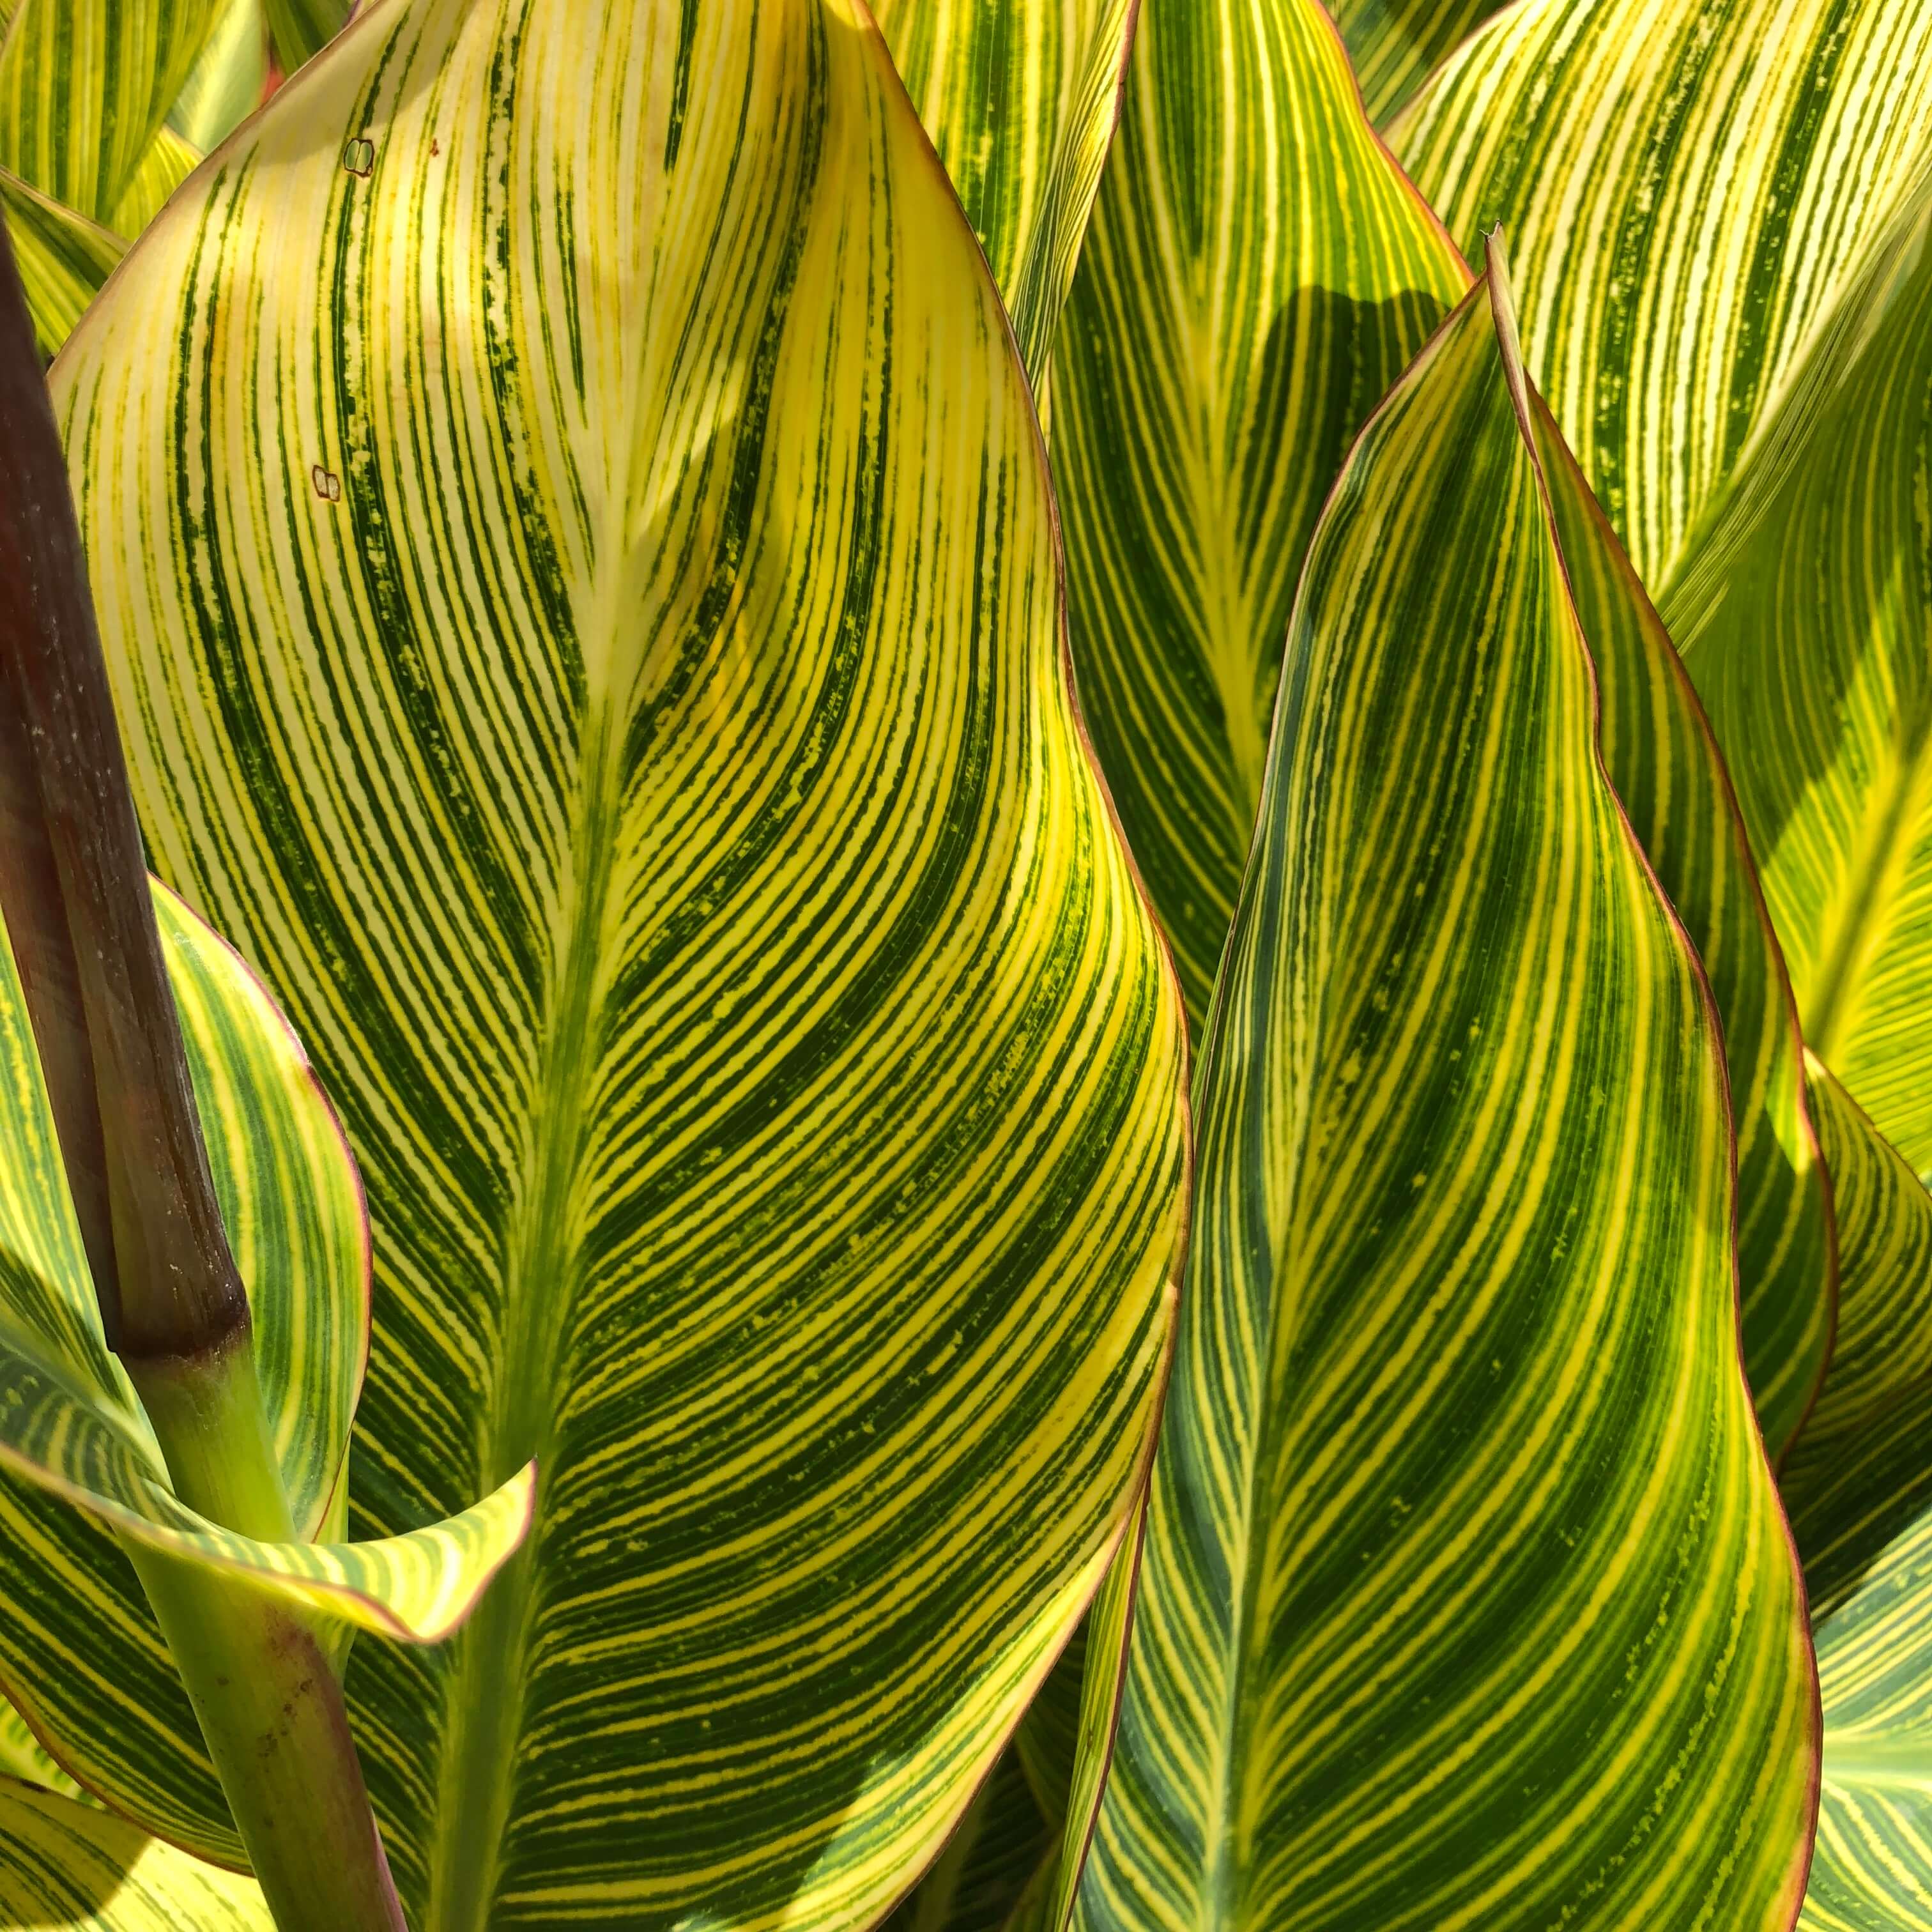 Picture of Canna plant with yellow and green striped leaves